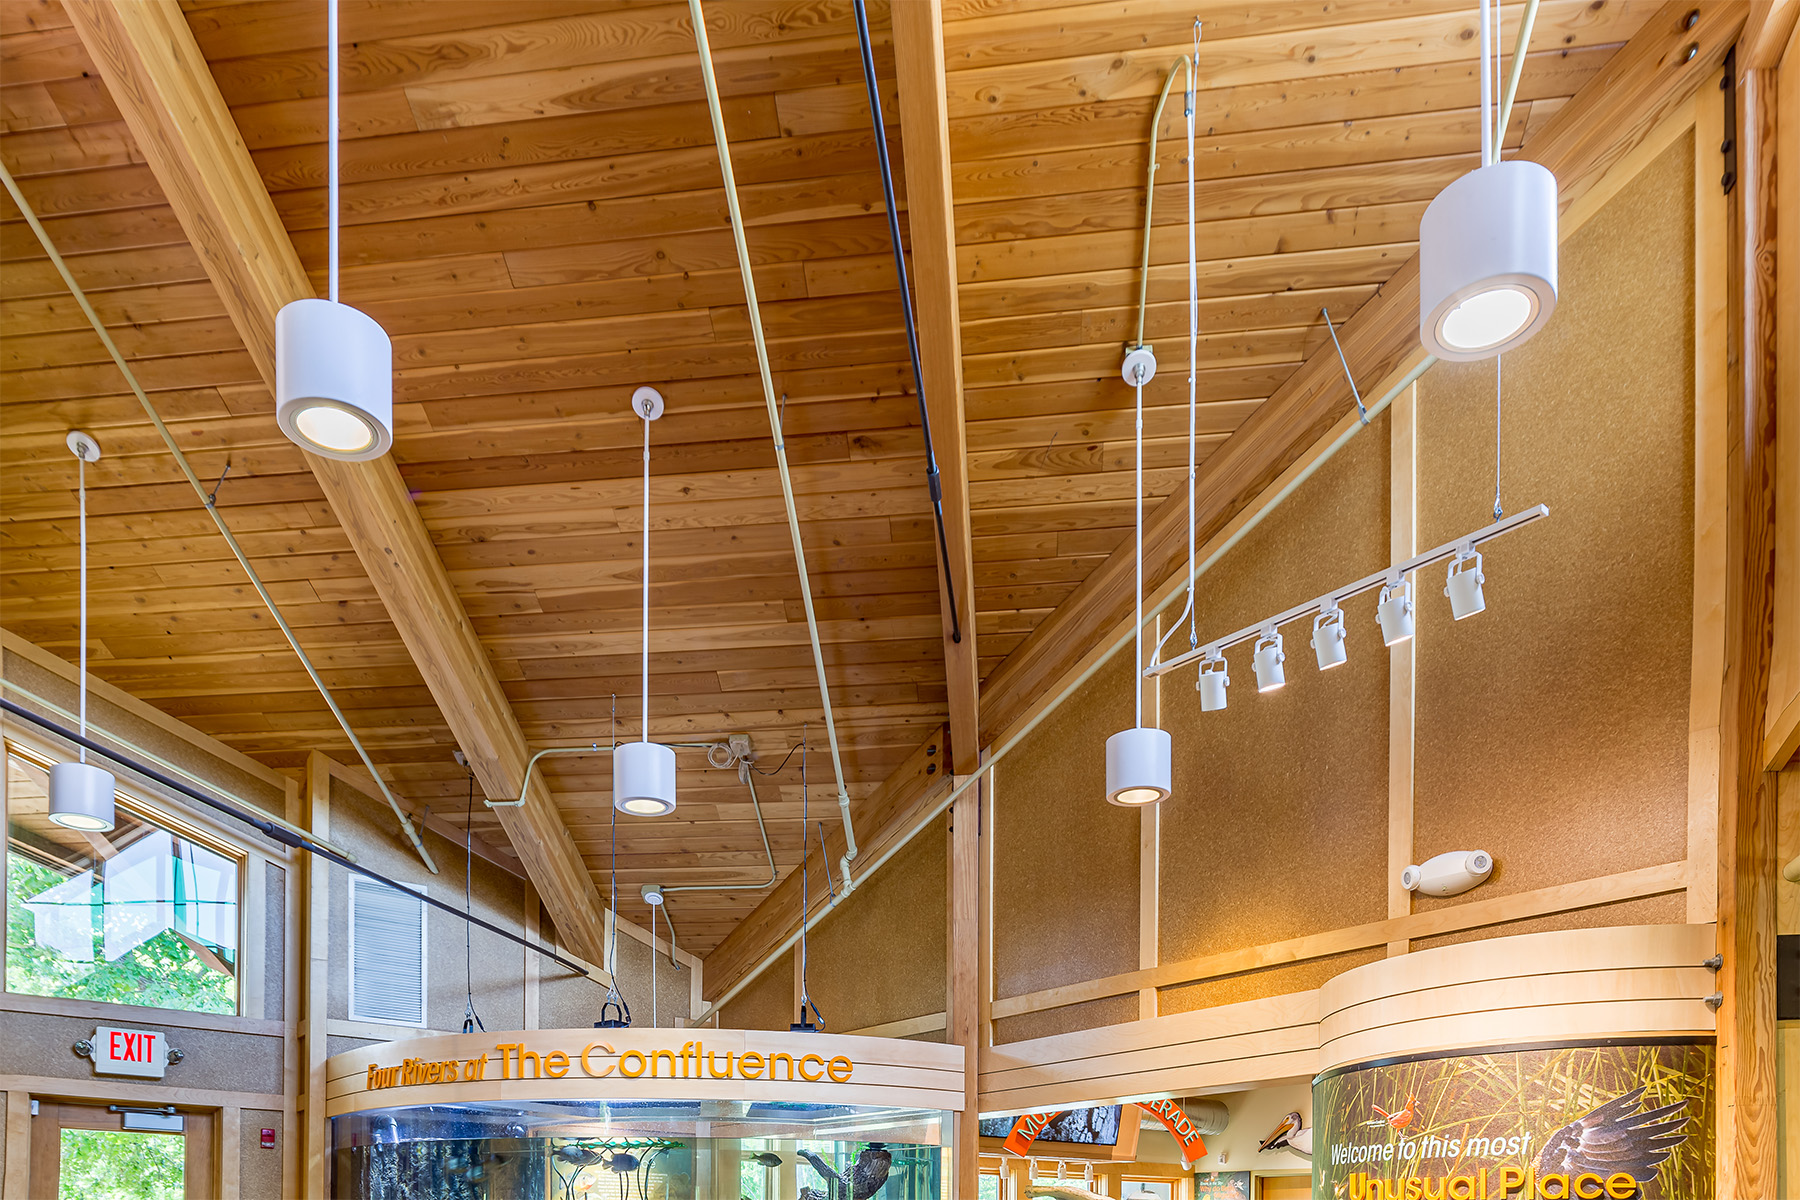 White cylinder downlights provide general lighting in the lobby of the Four Rivers exhibit hall, while LED track lights provide precise lighting for educational exhibits.